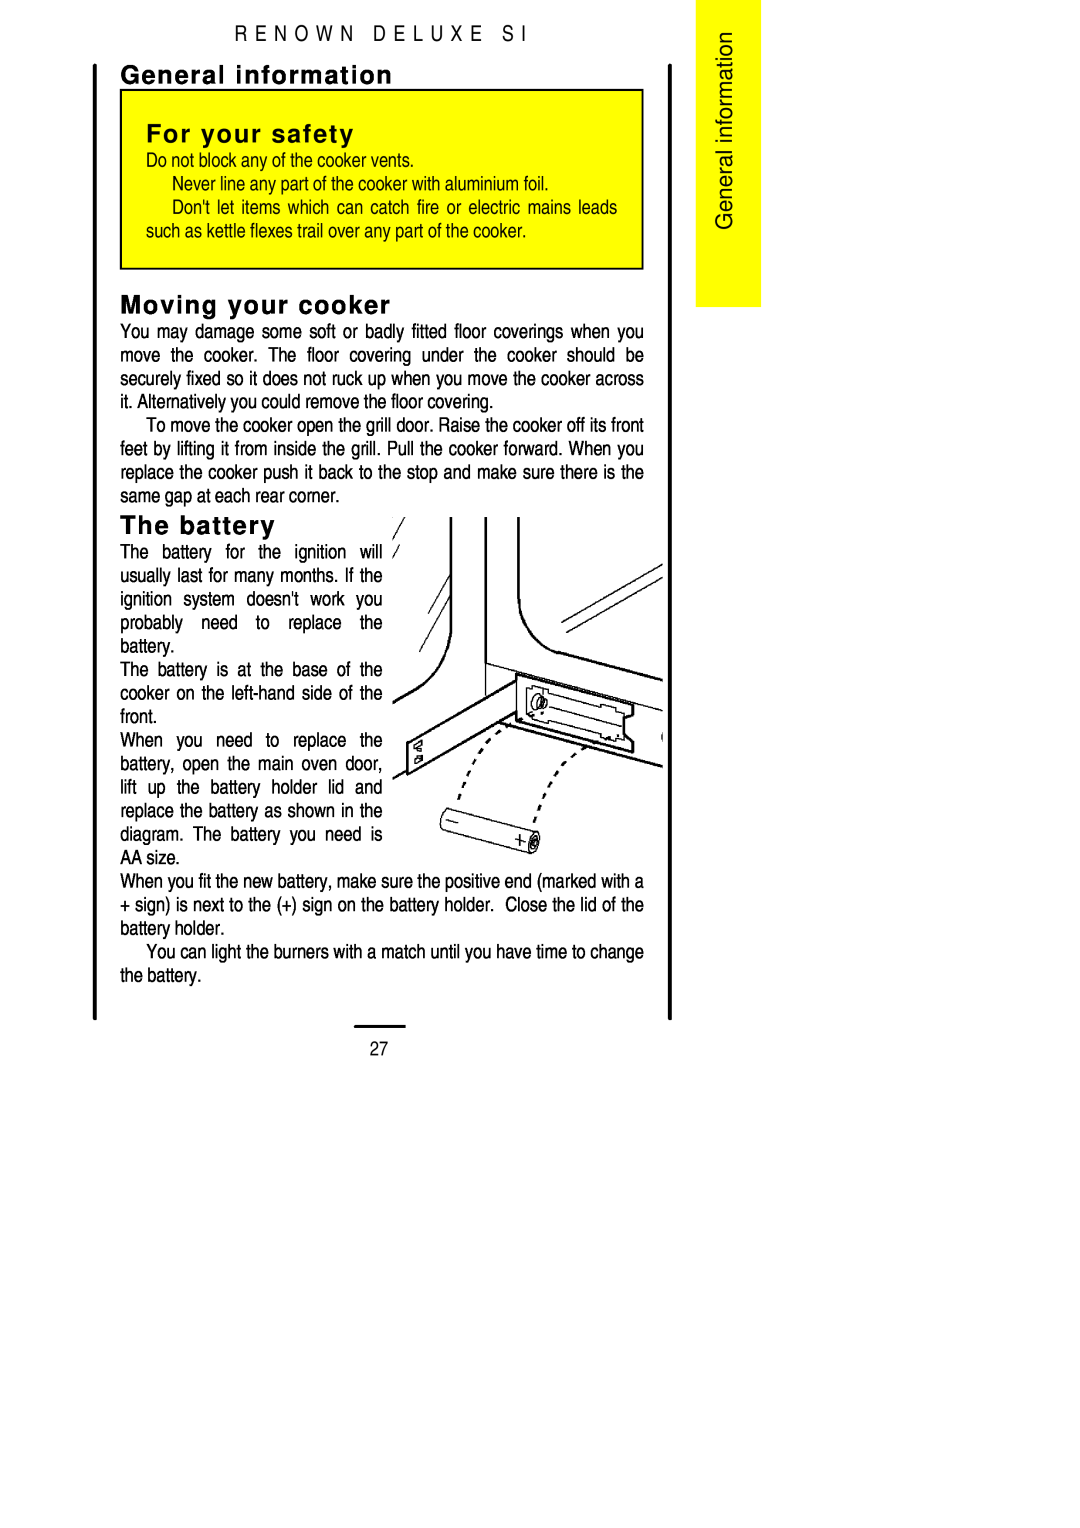 Parkinson Cowan SLIPIN installation instructions General information For your safety, Moving your cooker, The battery 